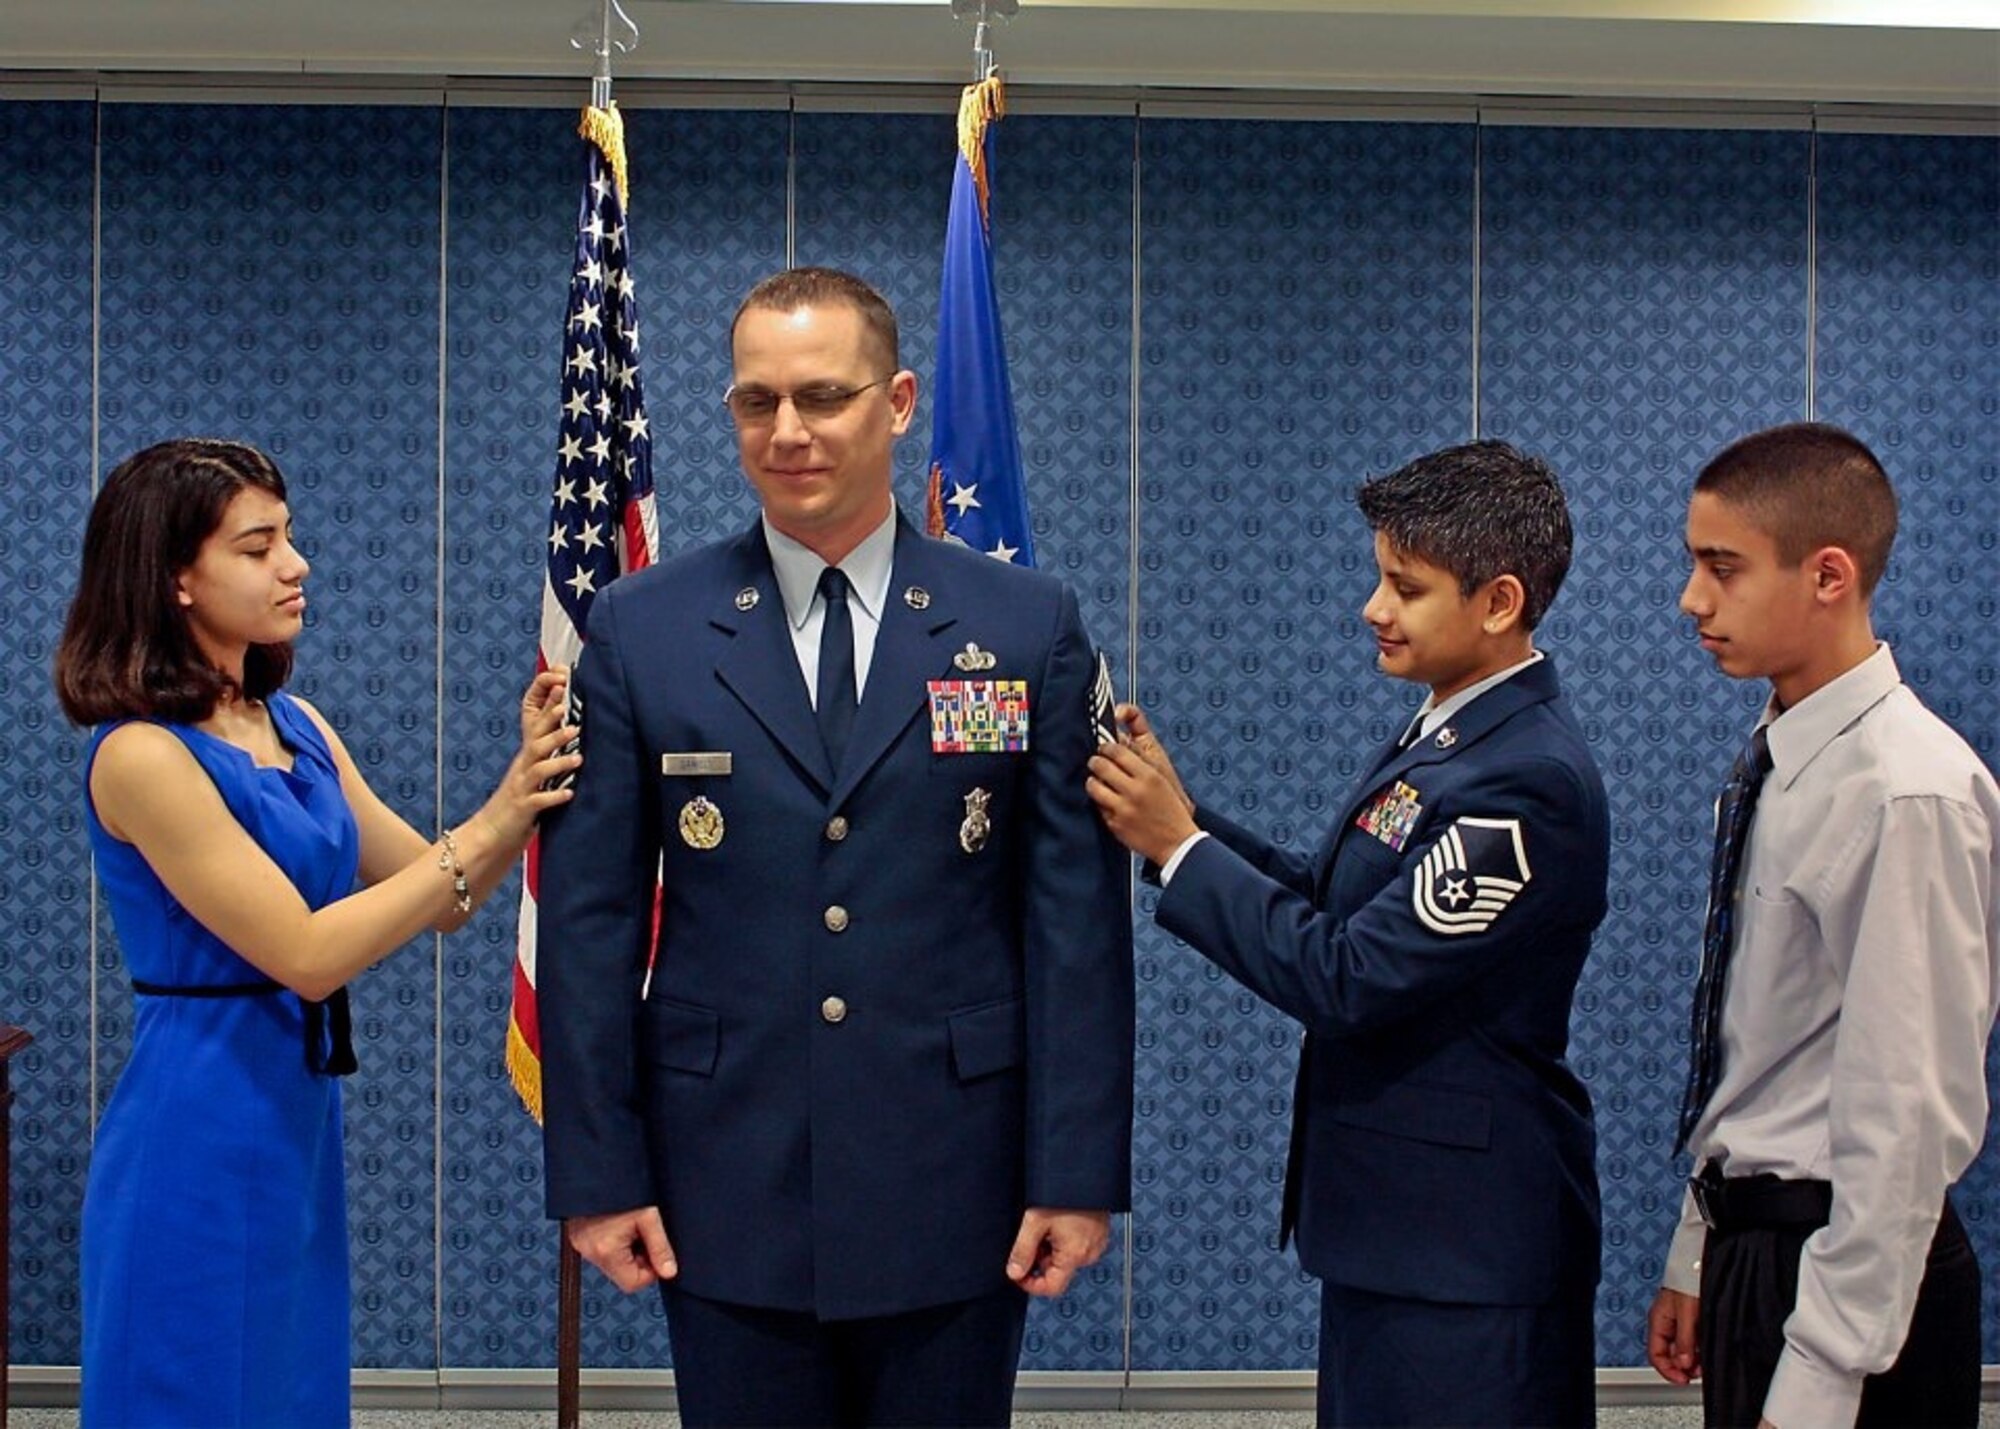 Then-Senior Master Sgt. Thomas Daniels gets his chief stripes "tacked on" at the Pentagon on March 1, 2013. by his wife, Master Sgt. Sharlene Daniels, and his daughter, Dakotah, 16, while his son, Justice, 14, observes. (Courtesy photo)